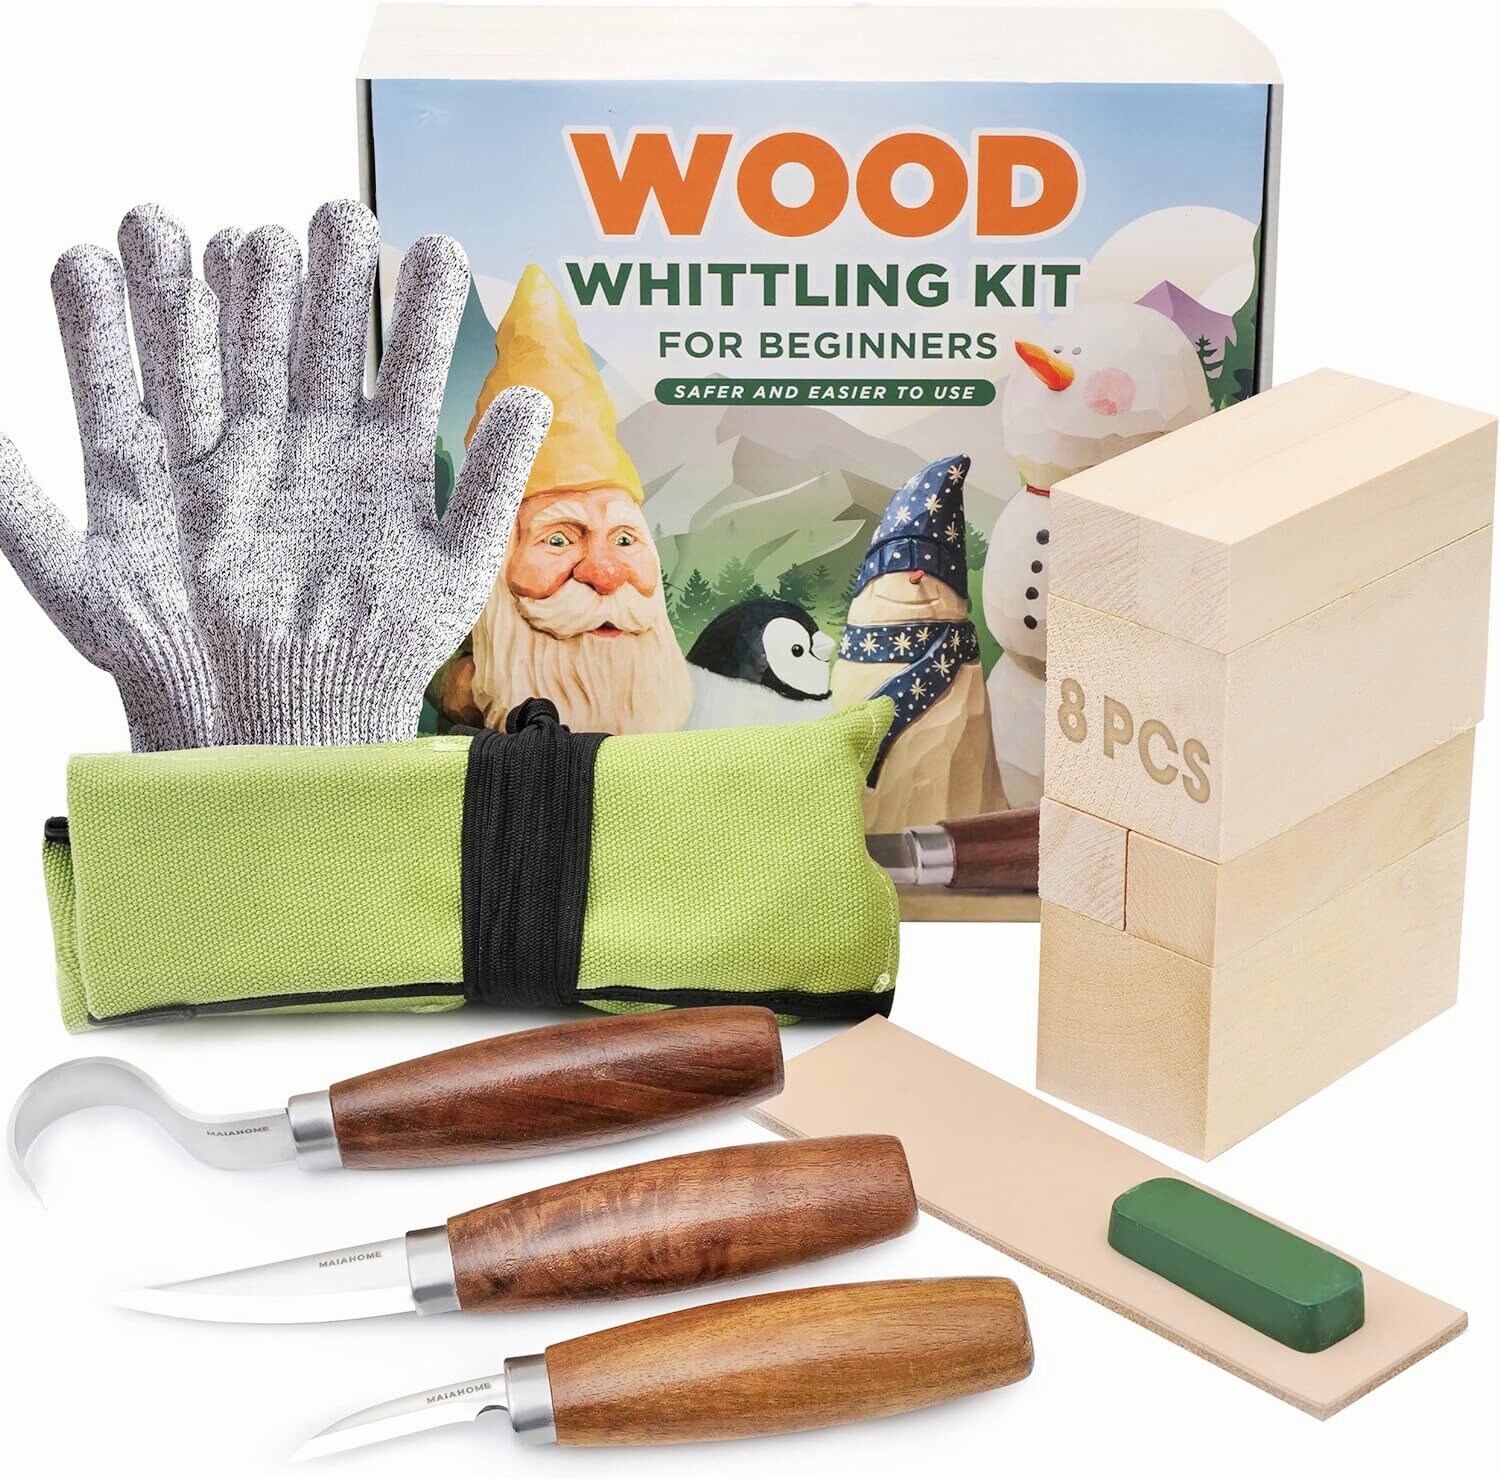 Wood Carving Kit for Beginners Whittling Kit With Elephant Linden  Woodworking Kit for Kids, Adults Wood Carving Stainless Steel Knife 